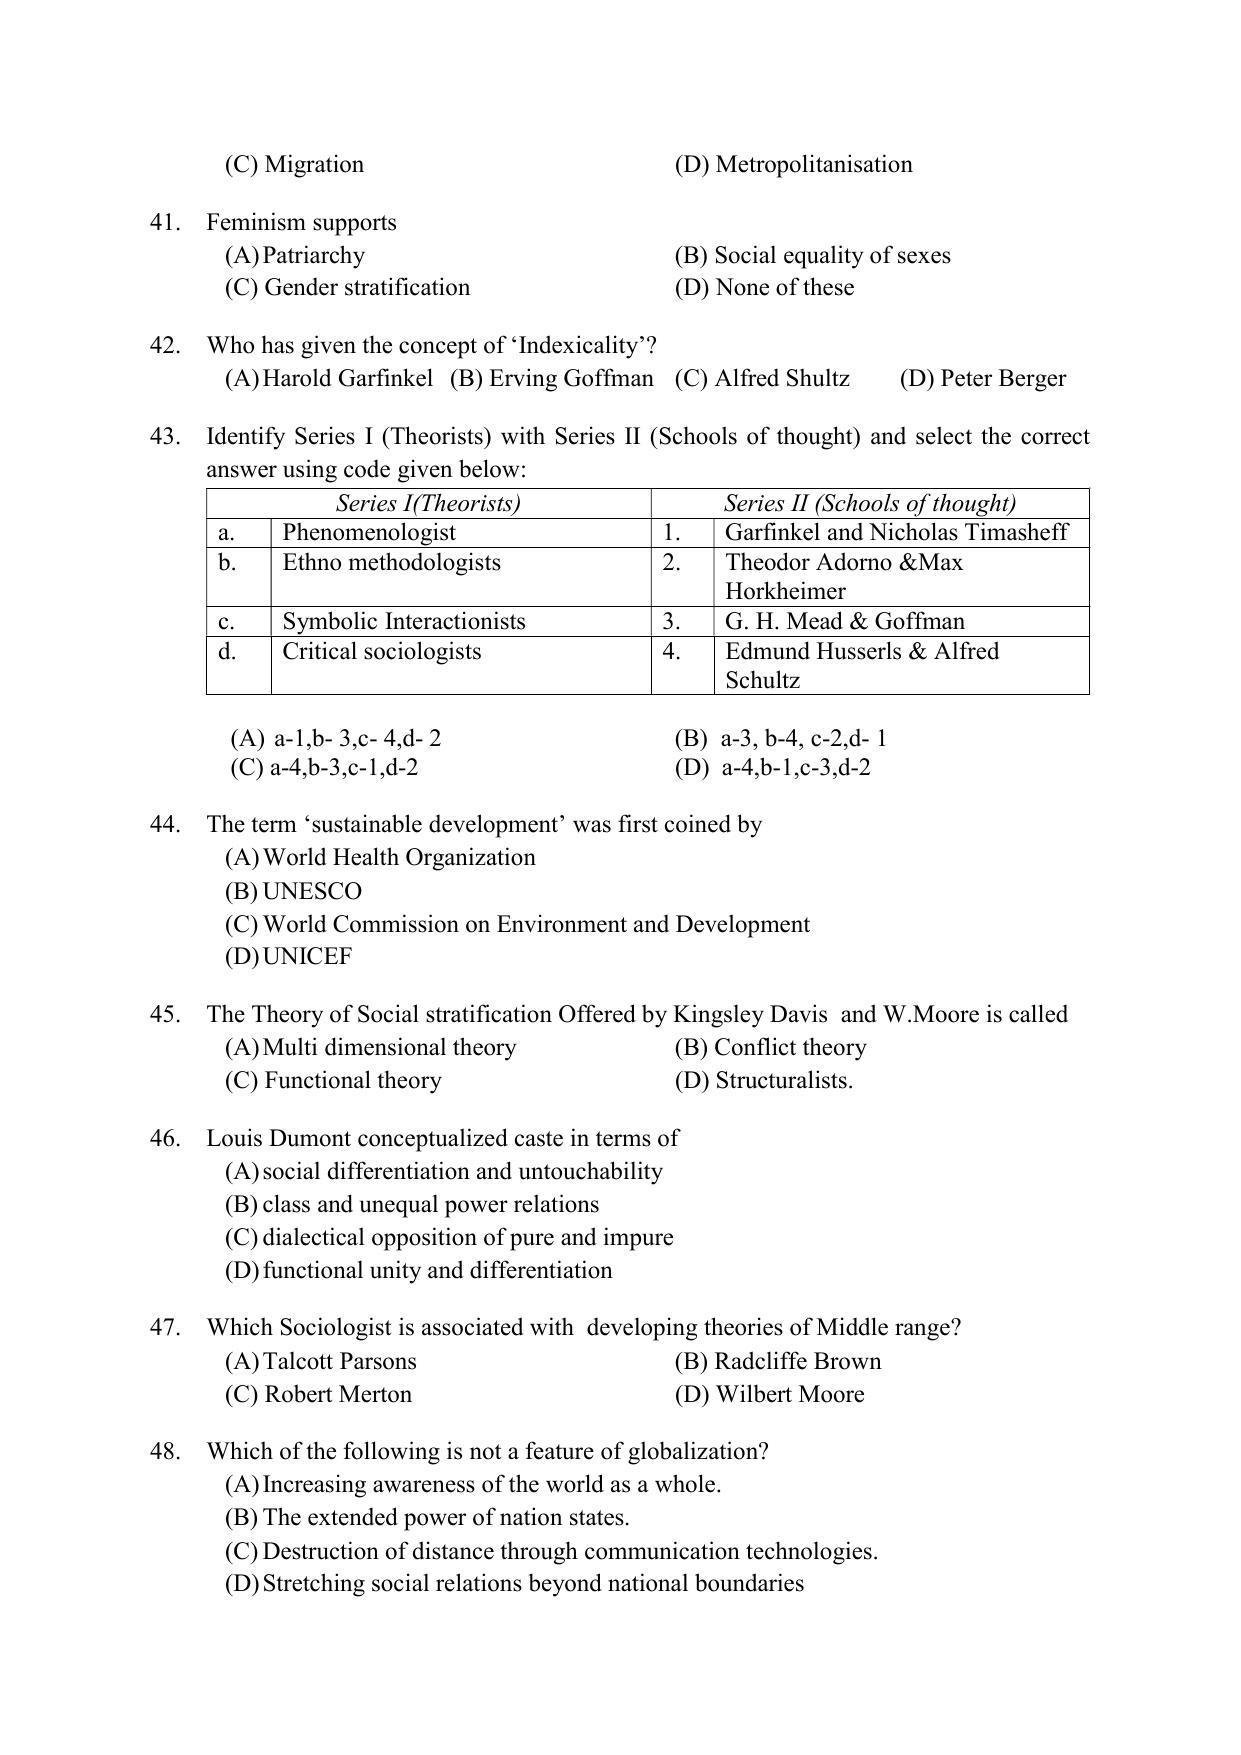 PU MPET Ancient Indian History & Archeology 2022 Question Papers - Page 74